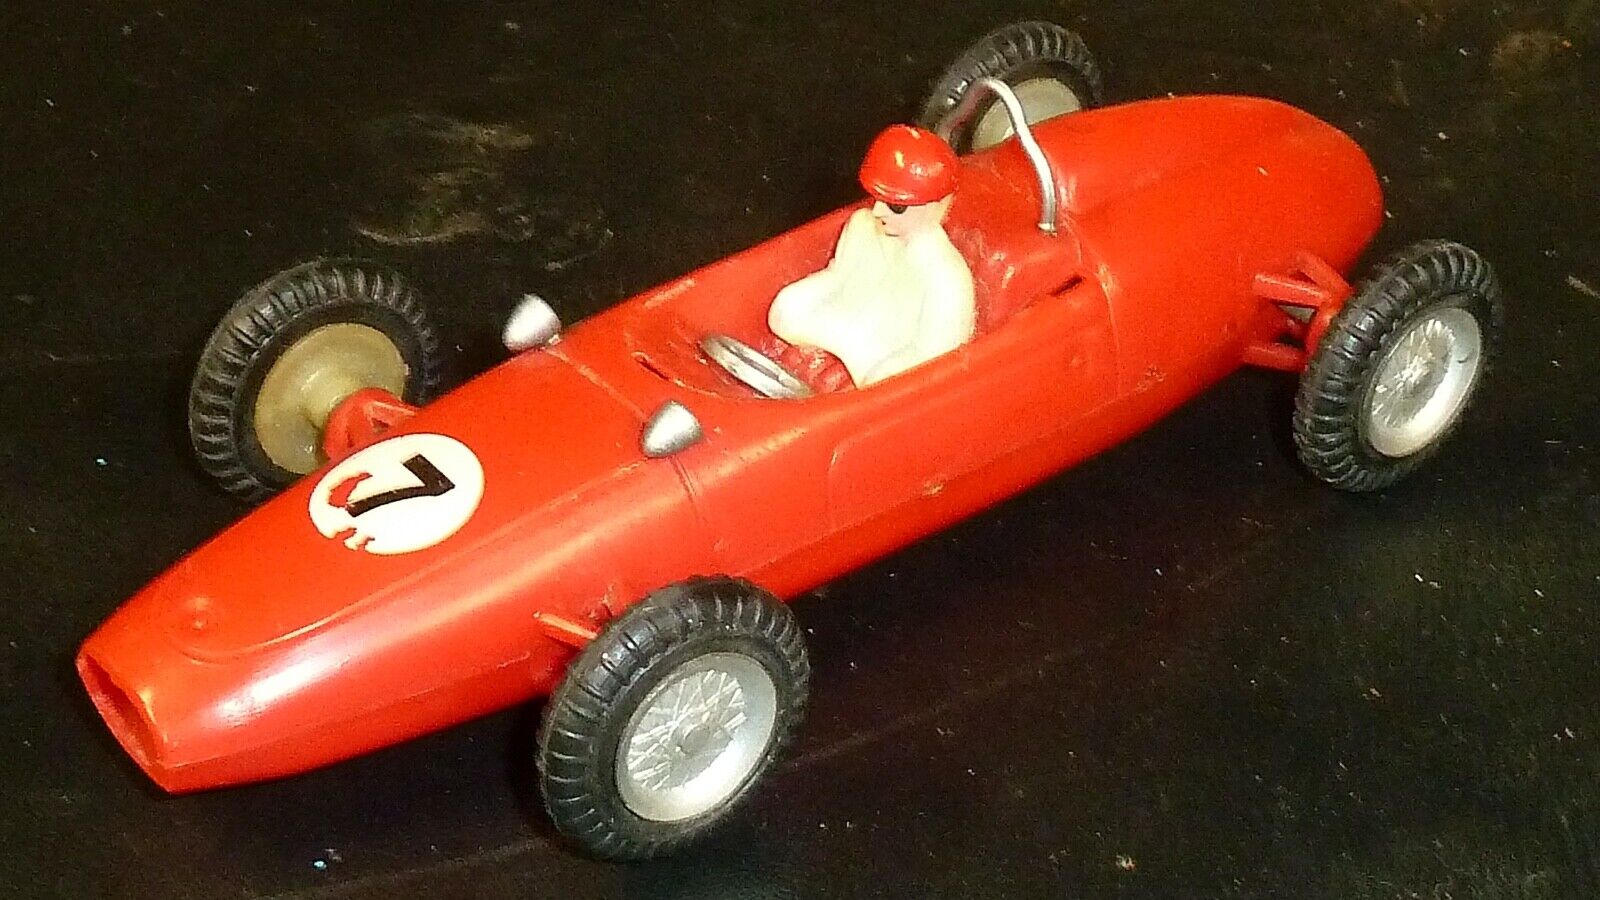 USA MADE VINTAGE RACE CAR MARX? VERY OTH MY CONDITION - SEE favorite NICE 5% OFF